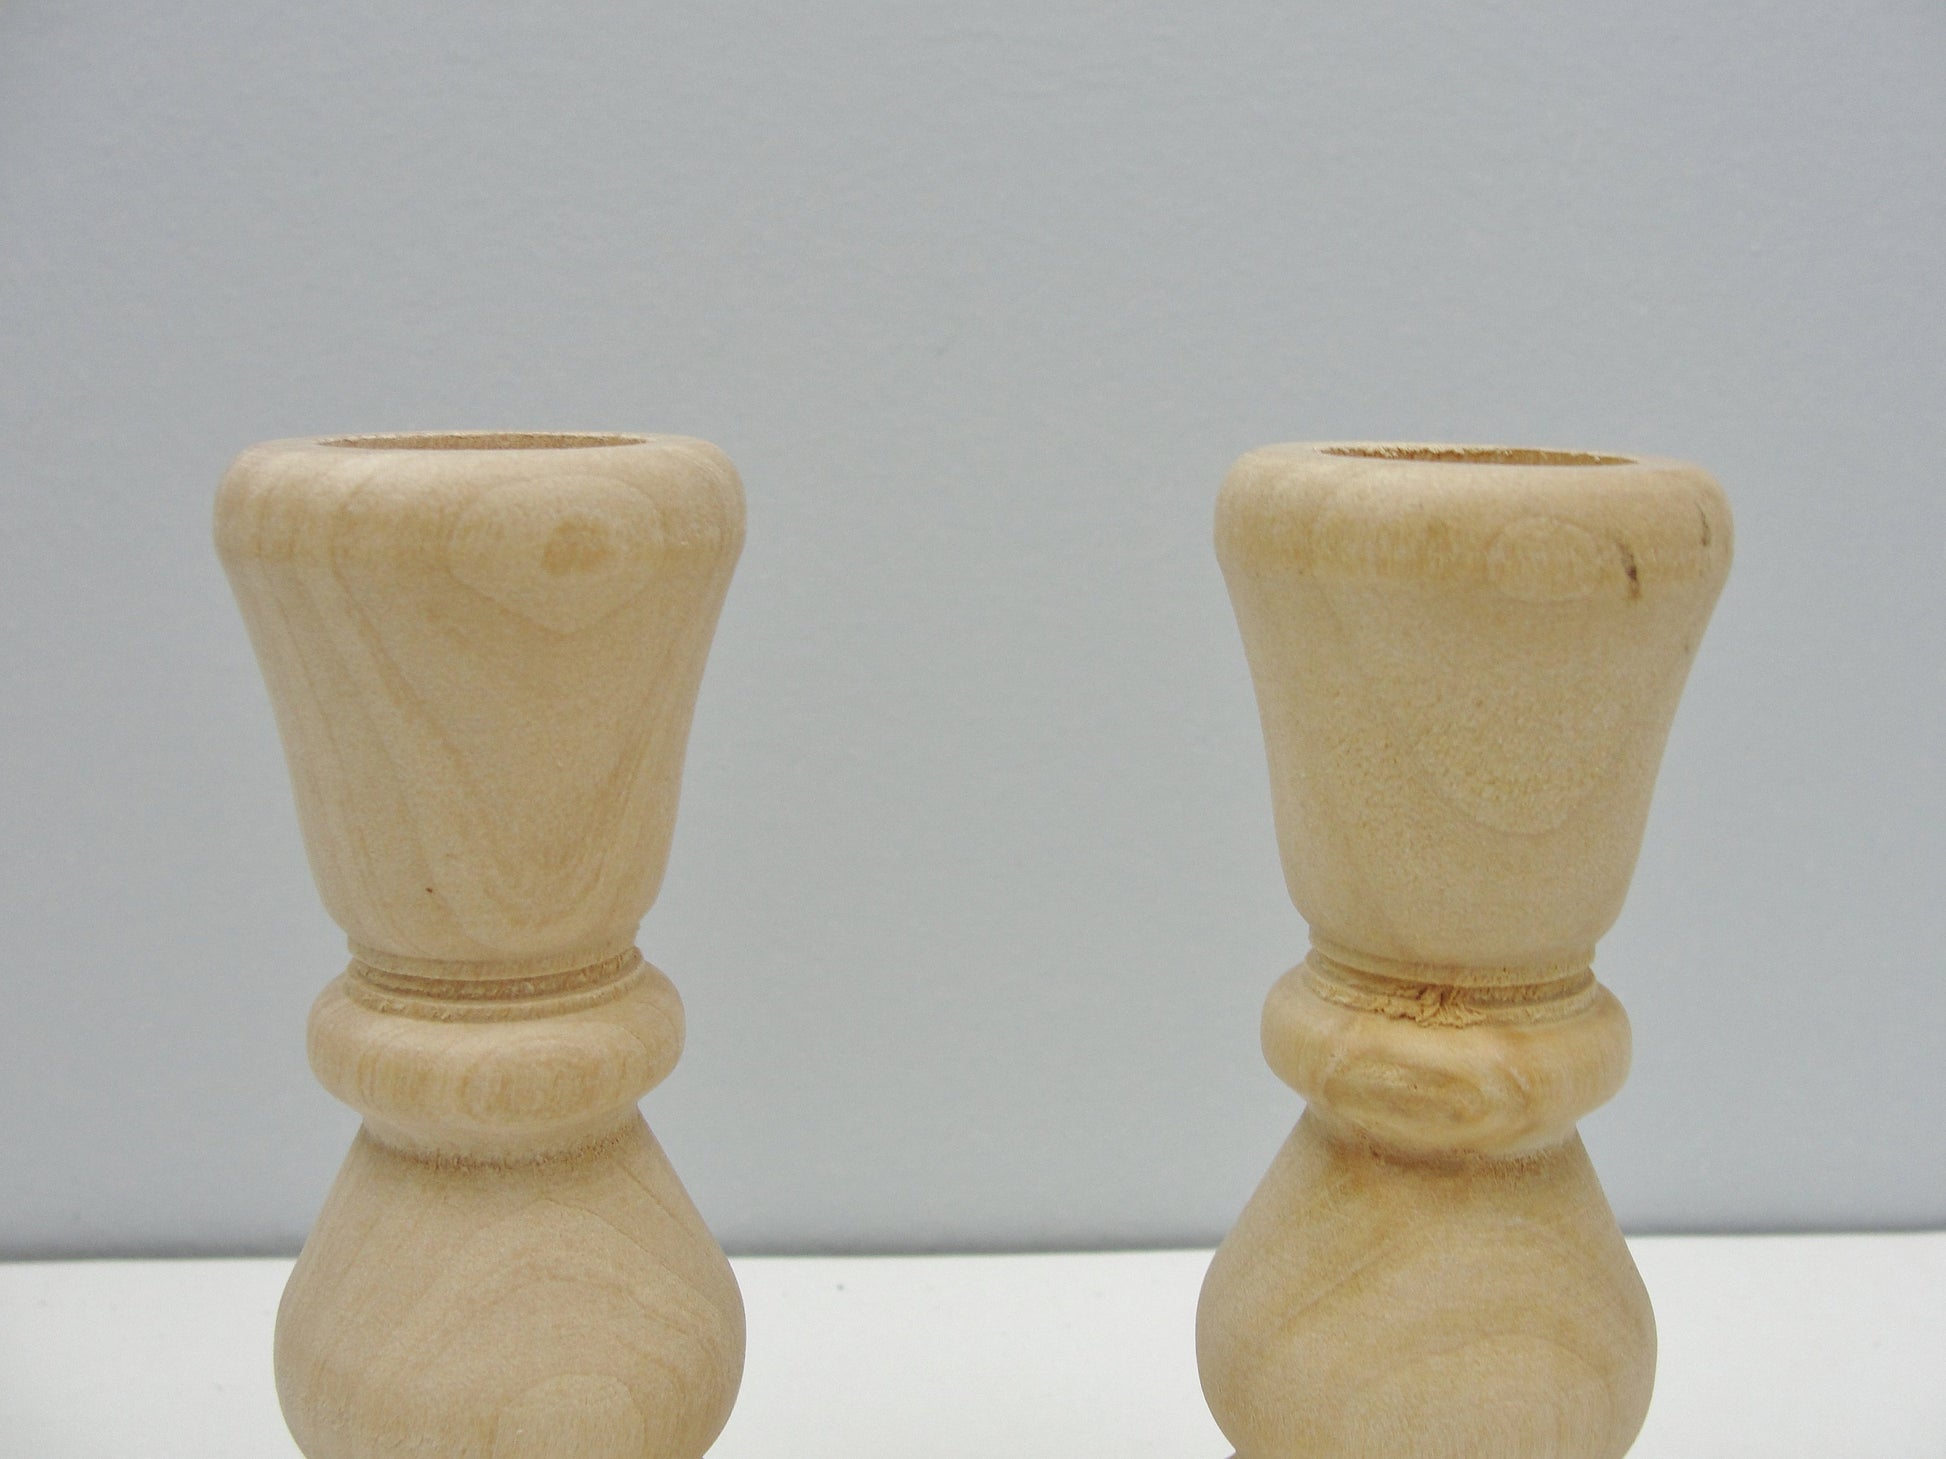 4 inch wood candle stick pair, candlestick pair, candle holders set of 2 - Wood parts - Craft Supply House